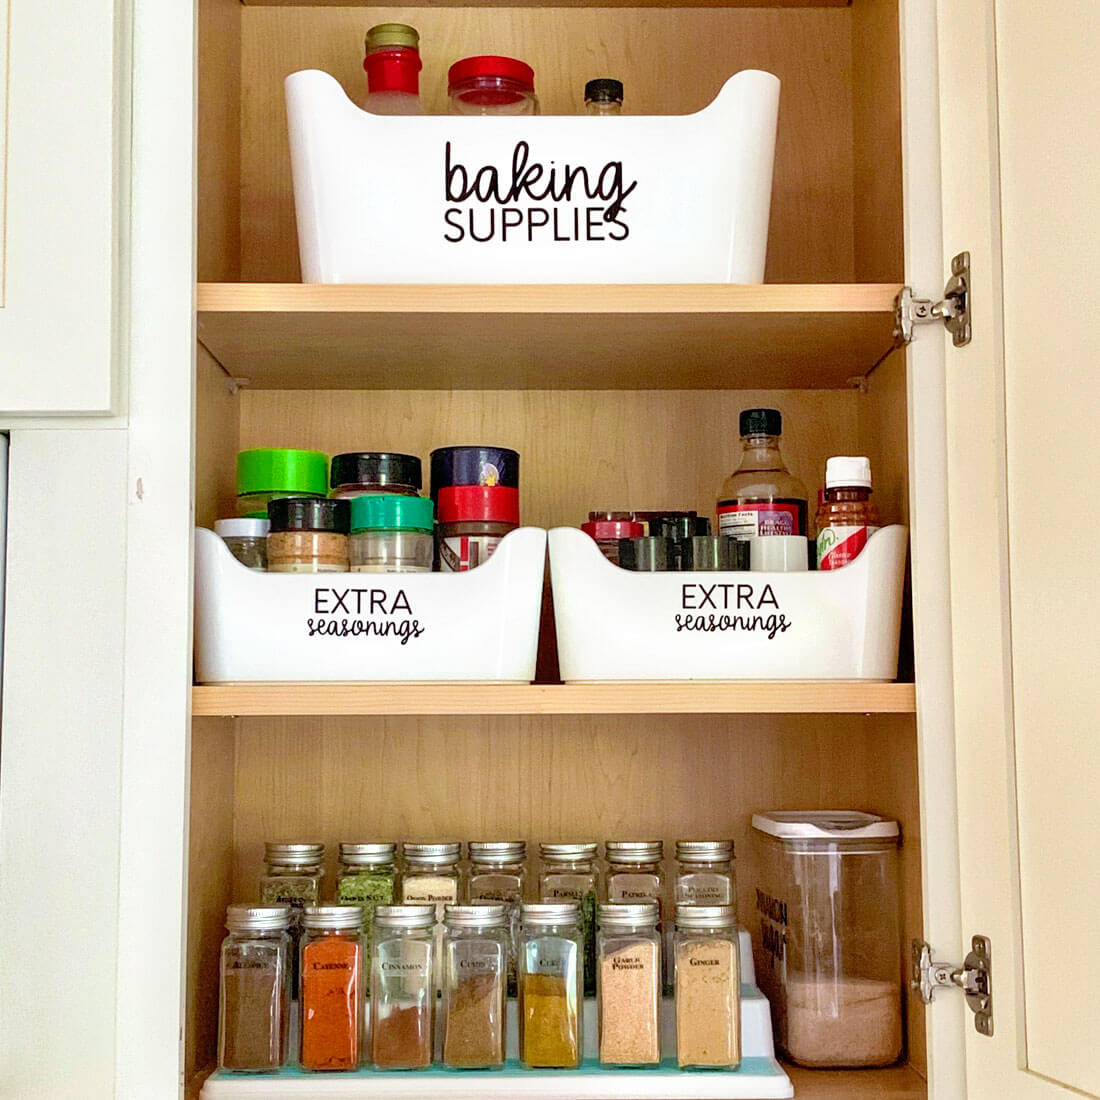 How to organize your spice rack - the after. What I used, how I cleaned it all up.